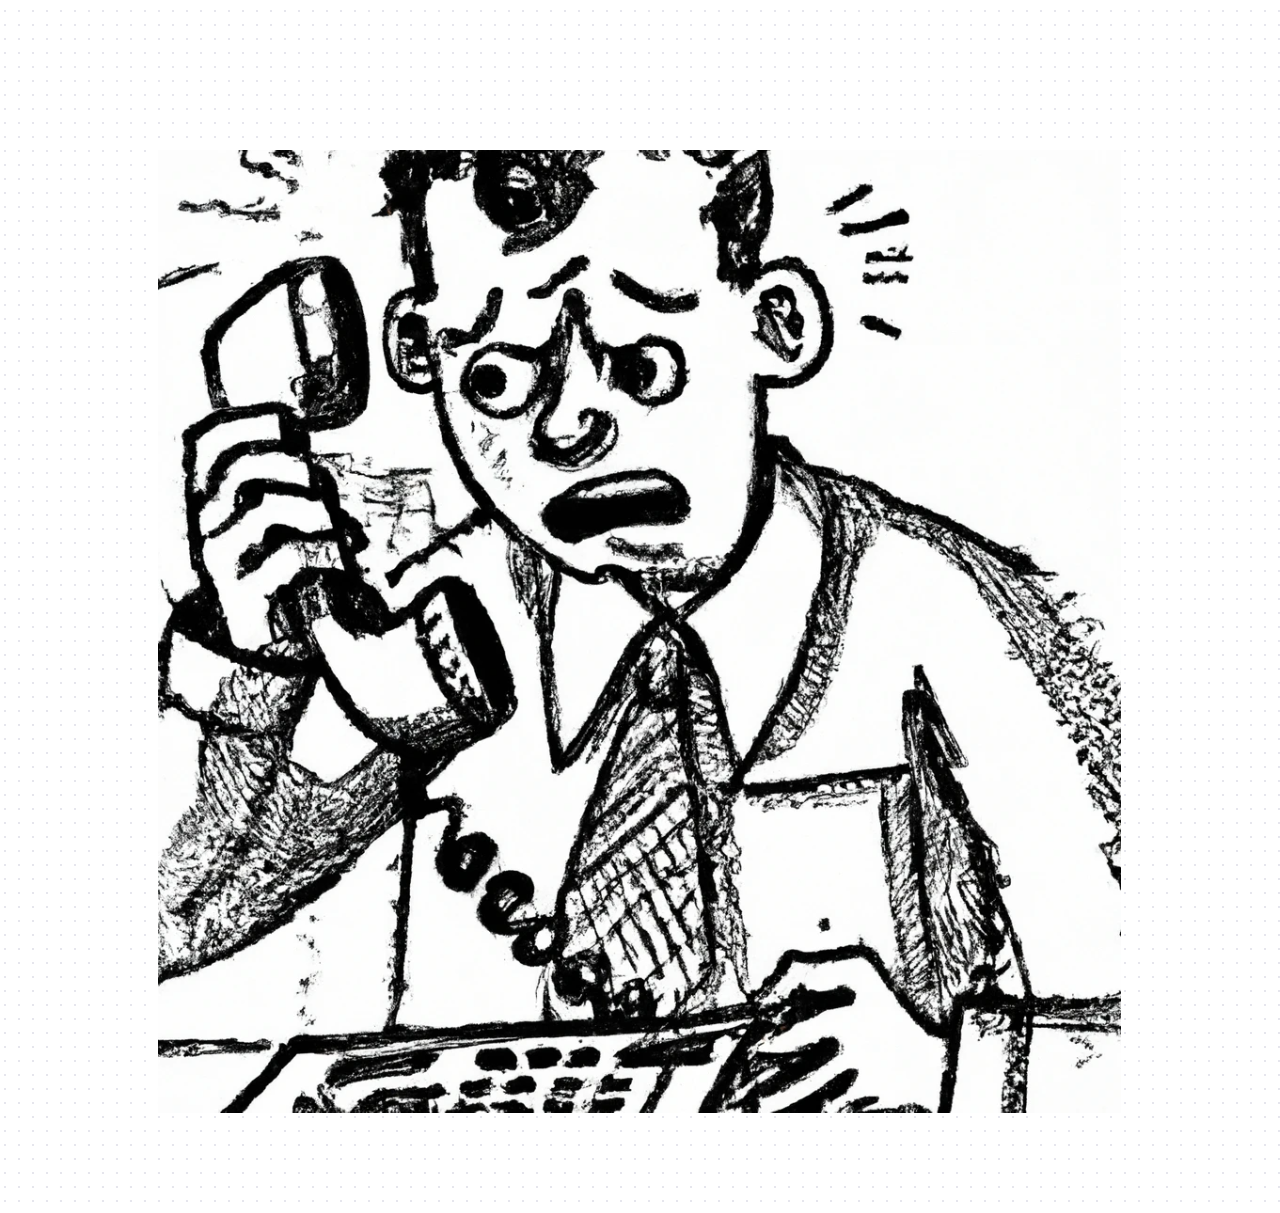 Dall-e2 Query: hatching style, man on the old style phone stressed